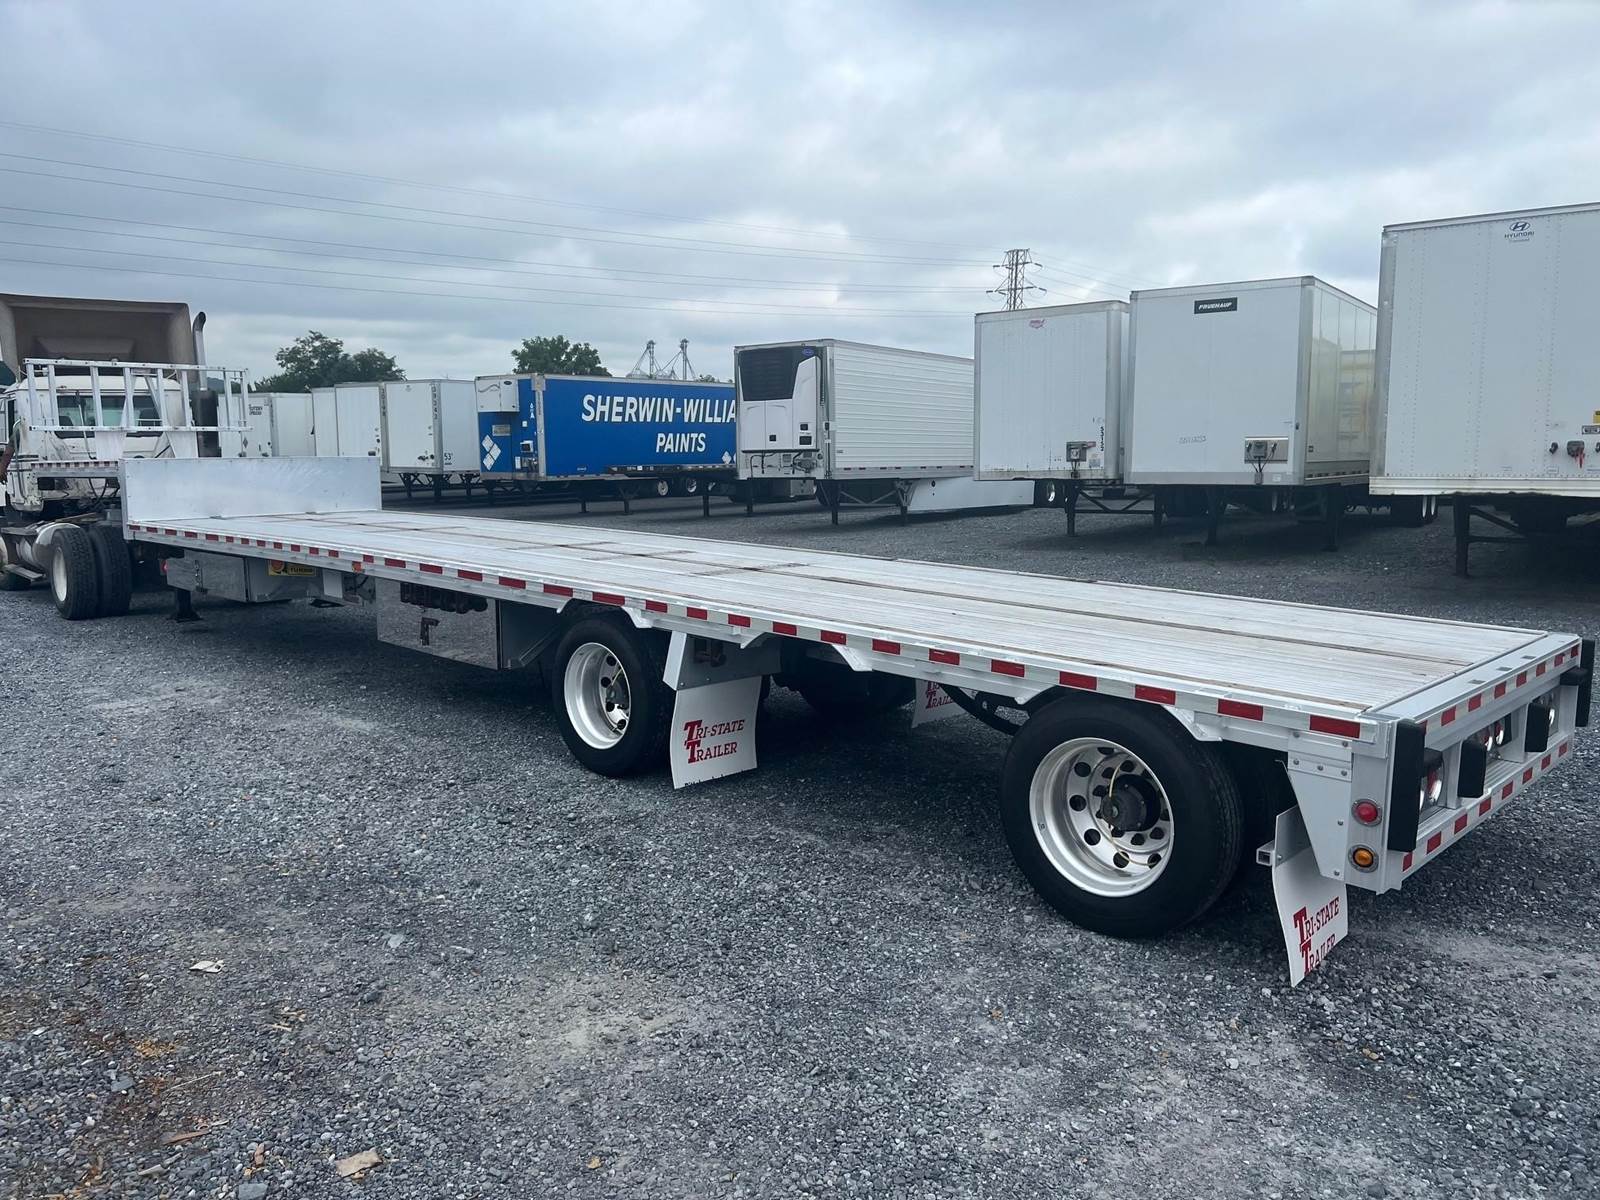 The Ultimate Solution in Freight Transportation - The Reitnouer DropMiser Aluminum Drop Deck Trailer